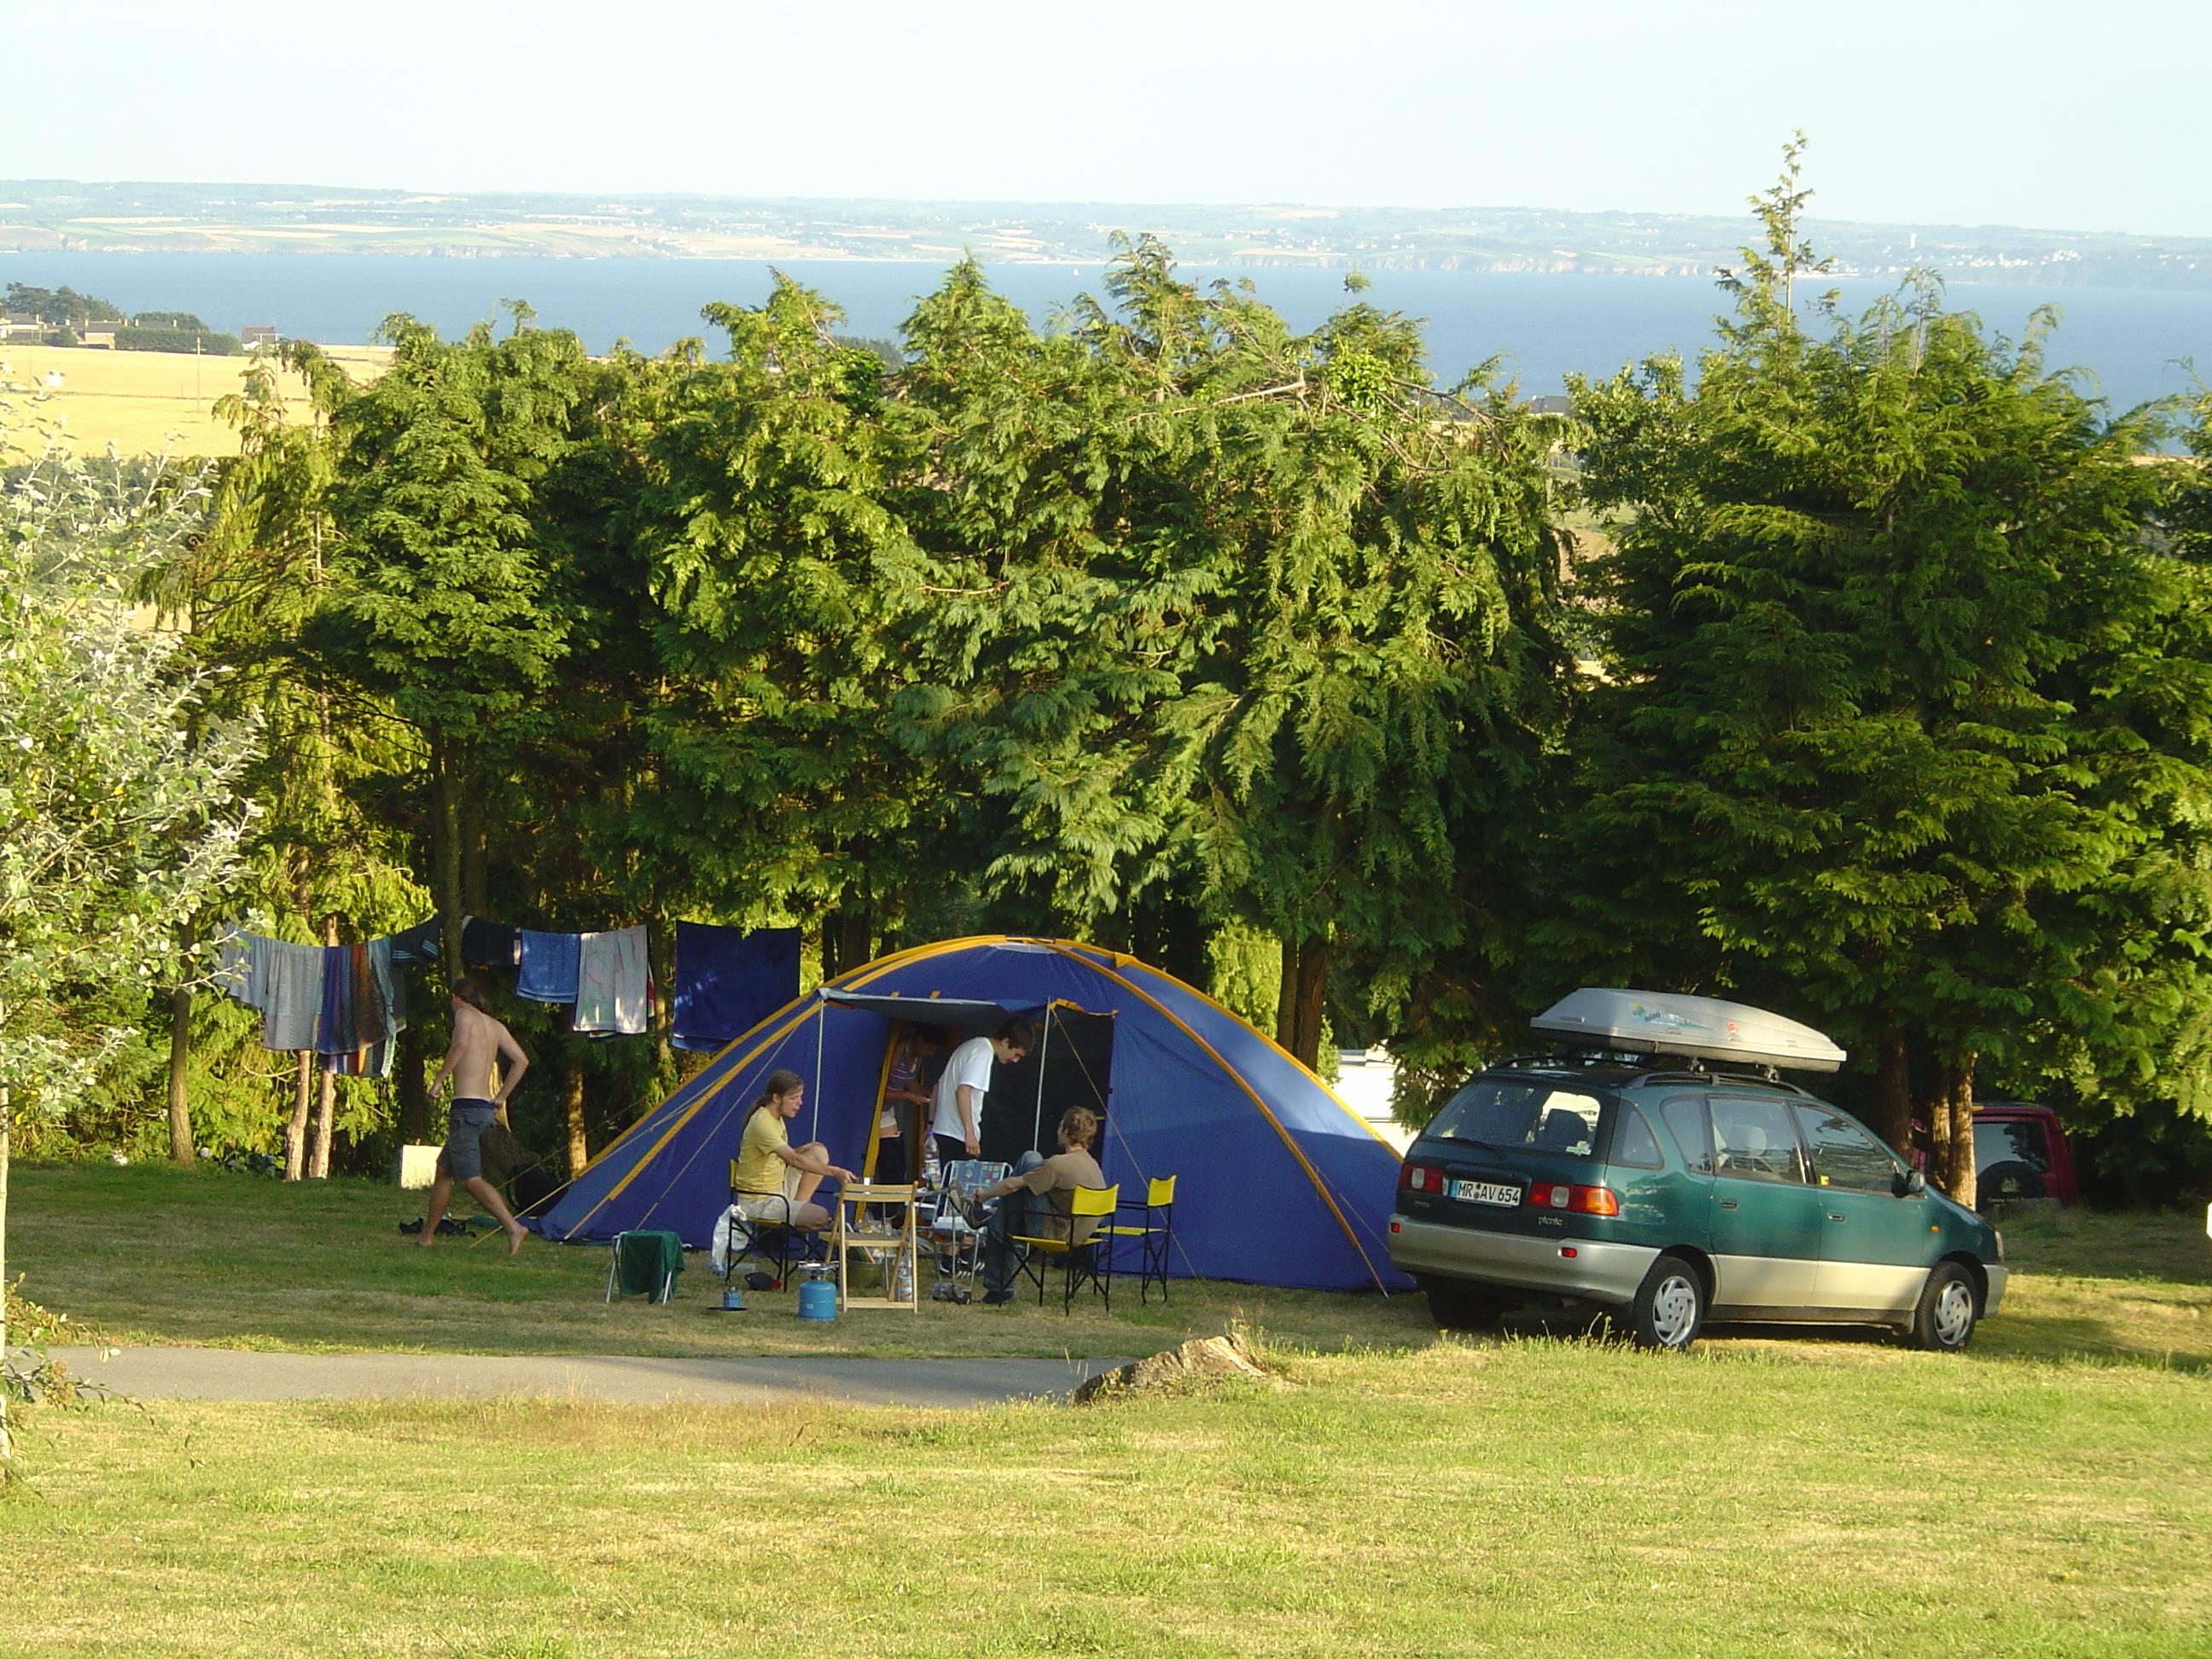 Camping pitch + vehicle